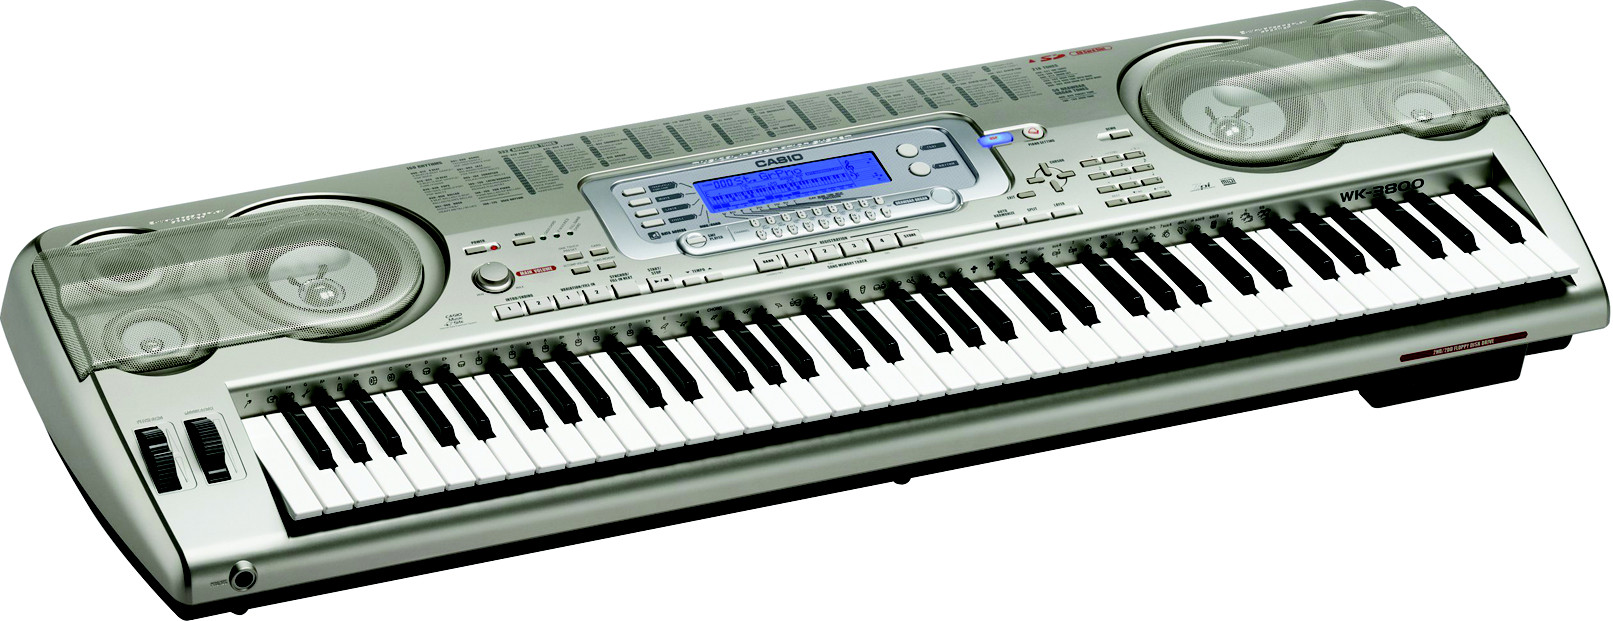 Casio dt-930 driver for mac